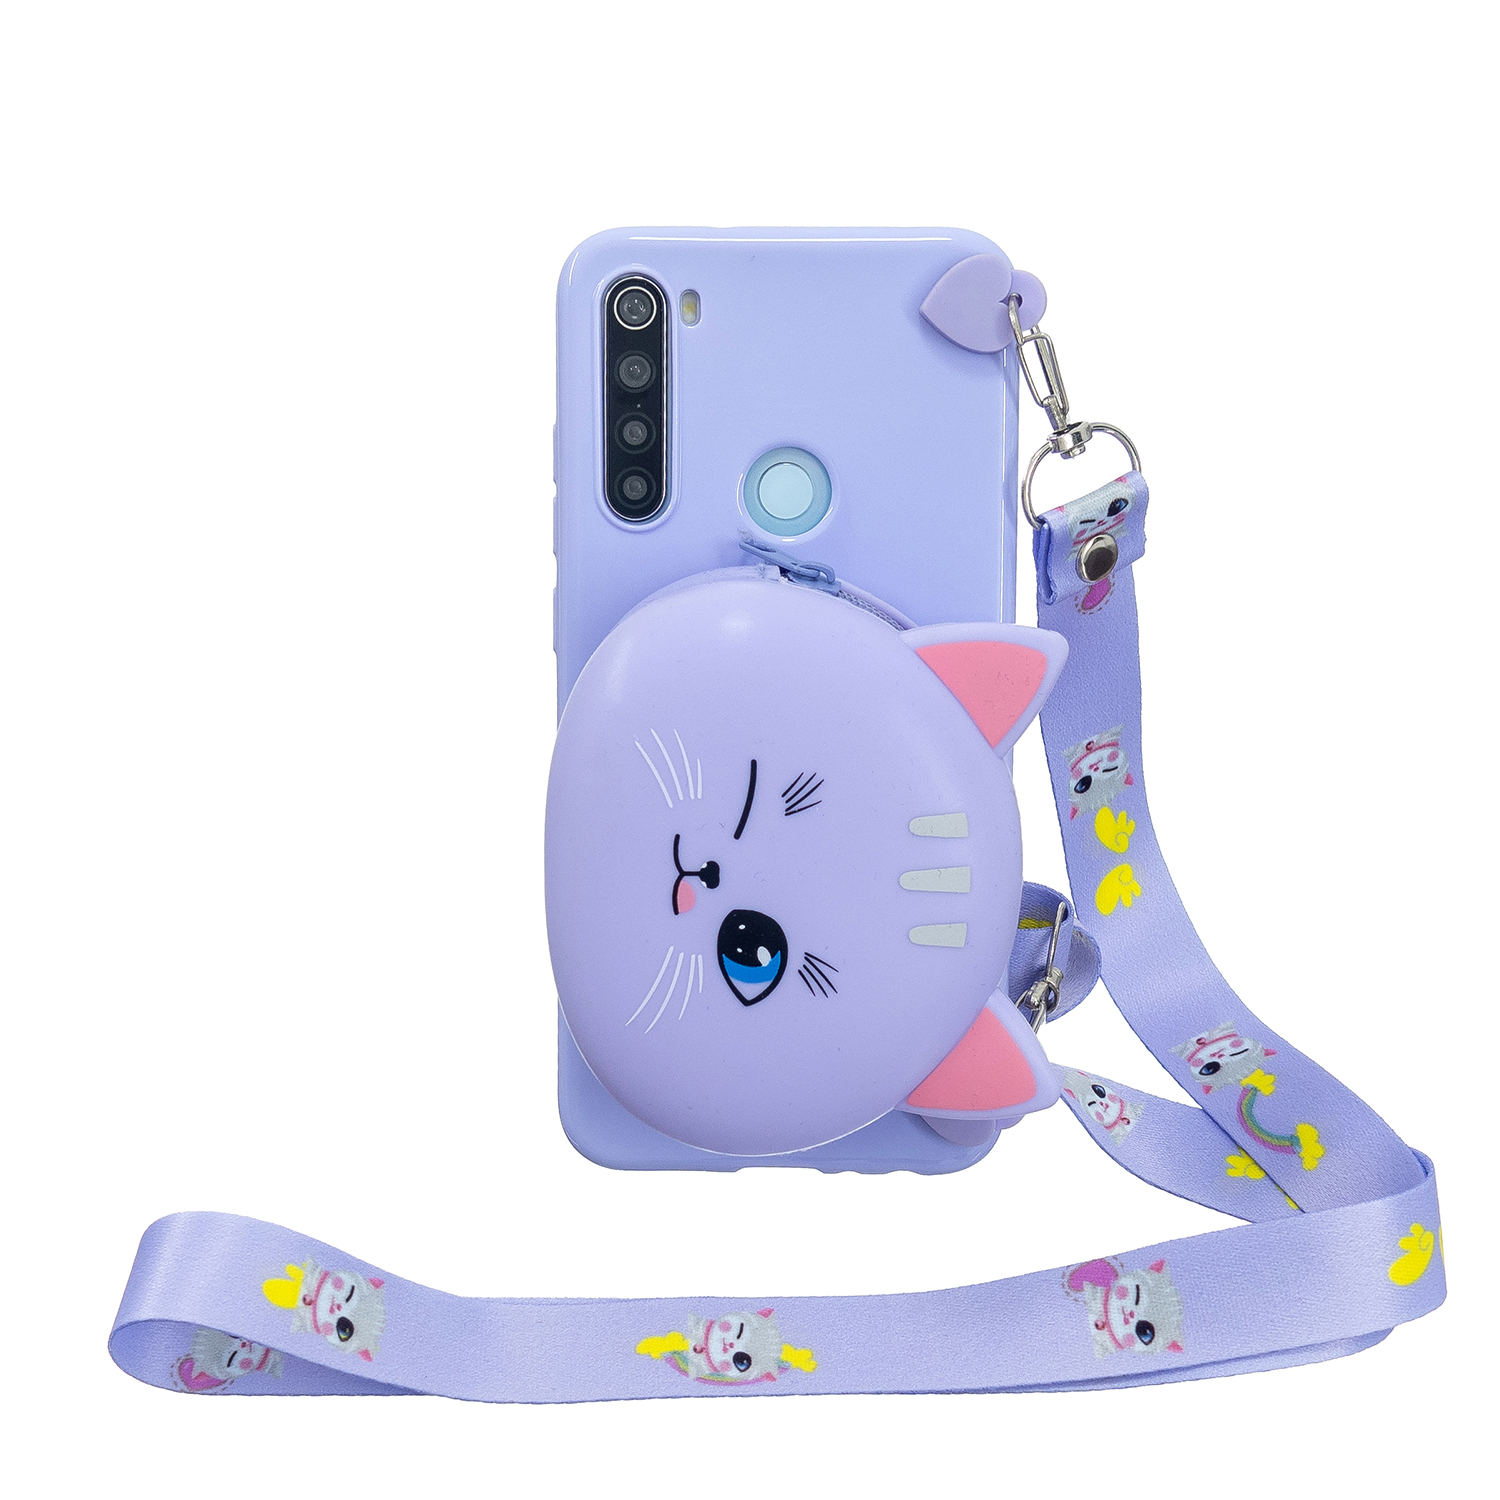 For Redmi Note 8/8T/8 Pro Cellphone Case Mobile Phone Shell Shockproof TPU Cover with Cartoon Cat Pig Panda Coin Purse Lovely Shoulder Starp  Purple